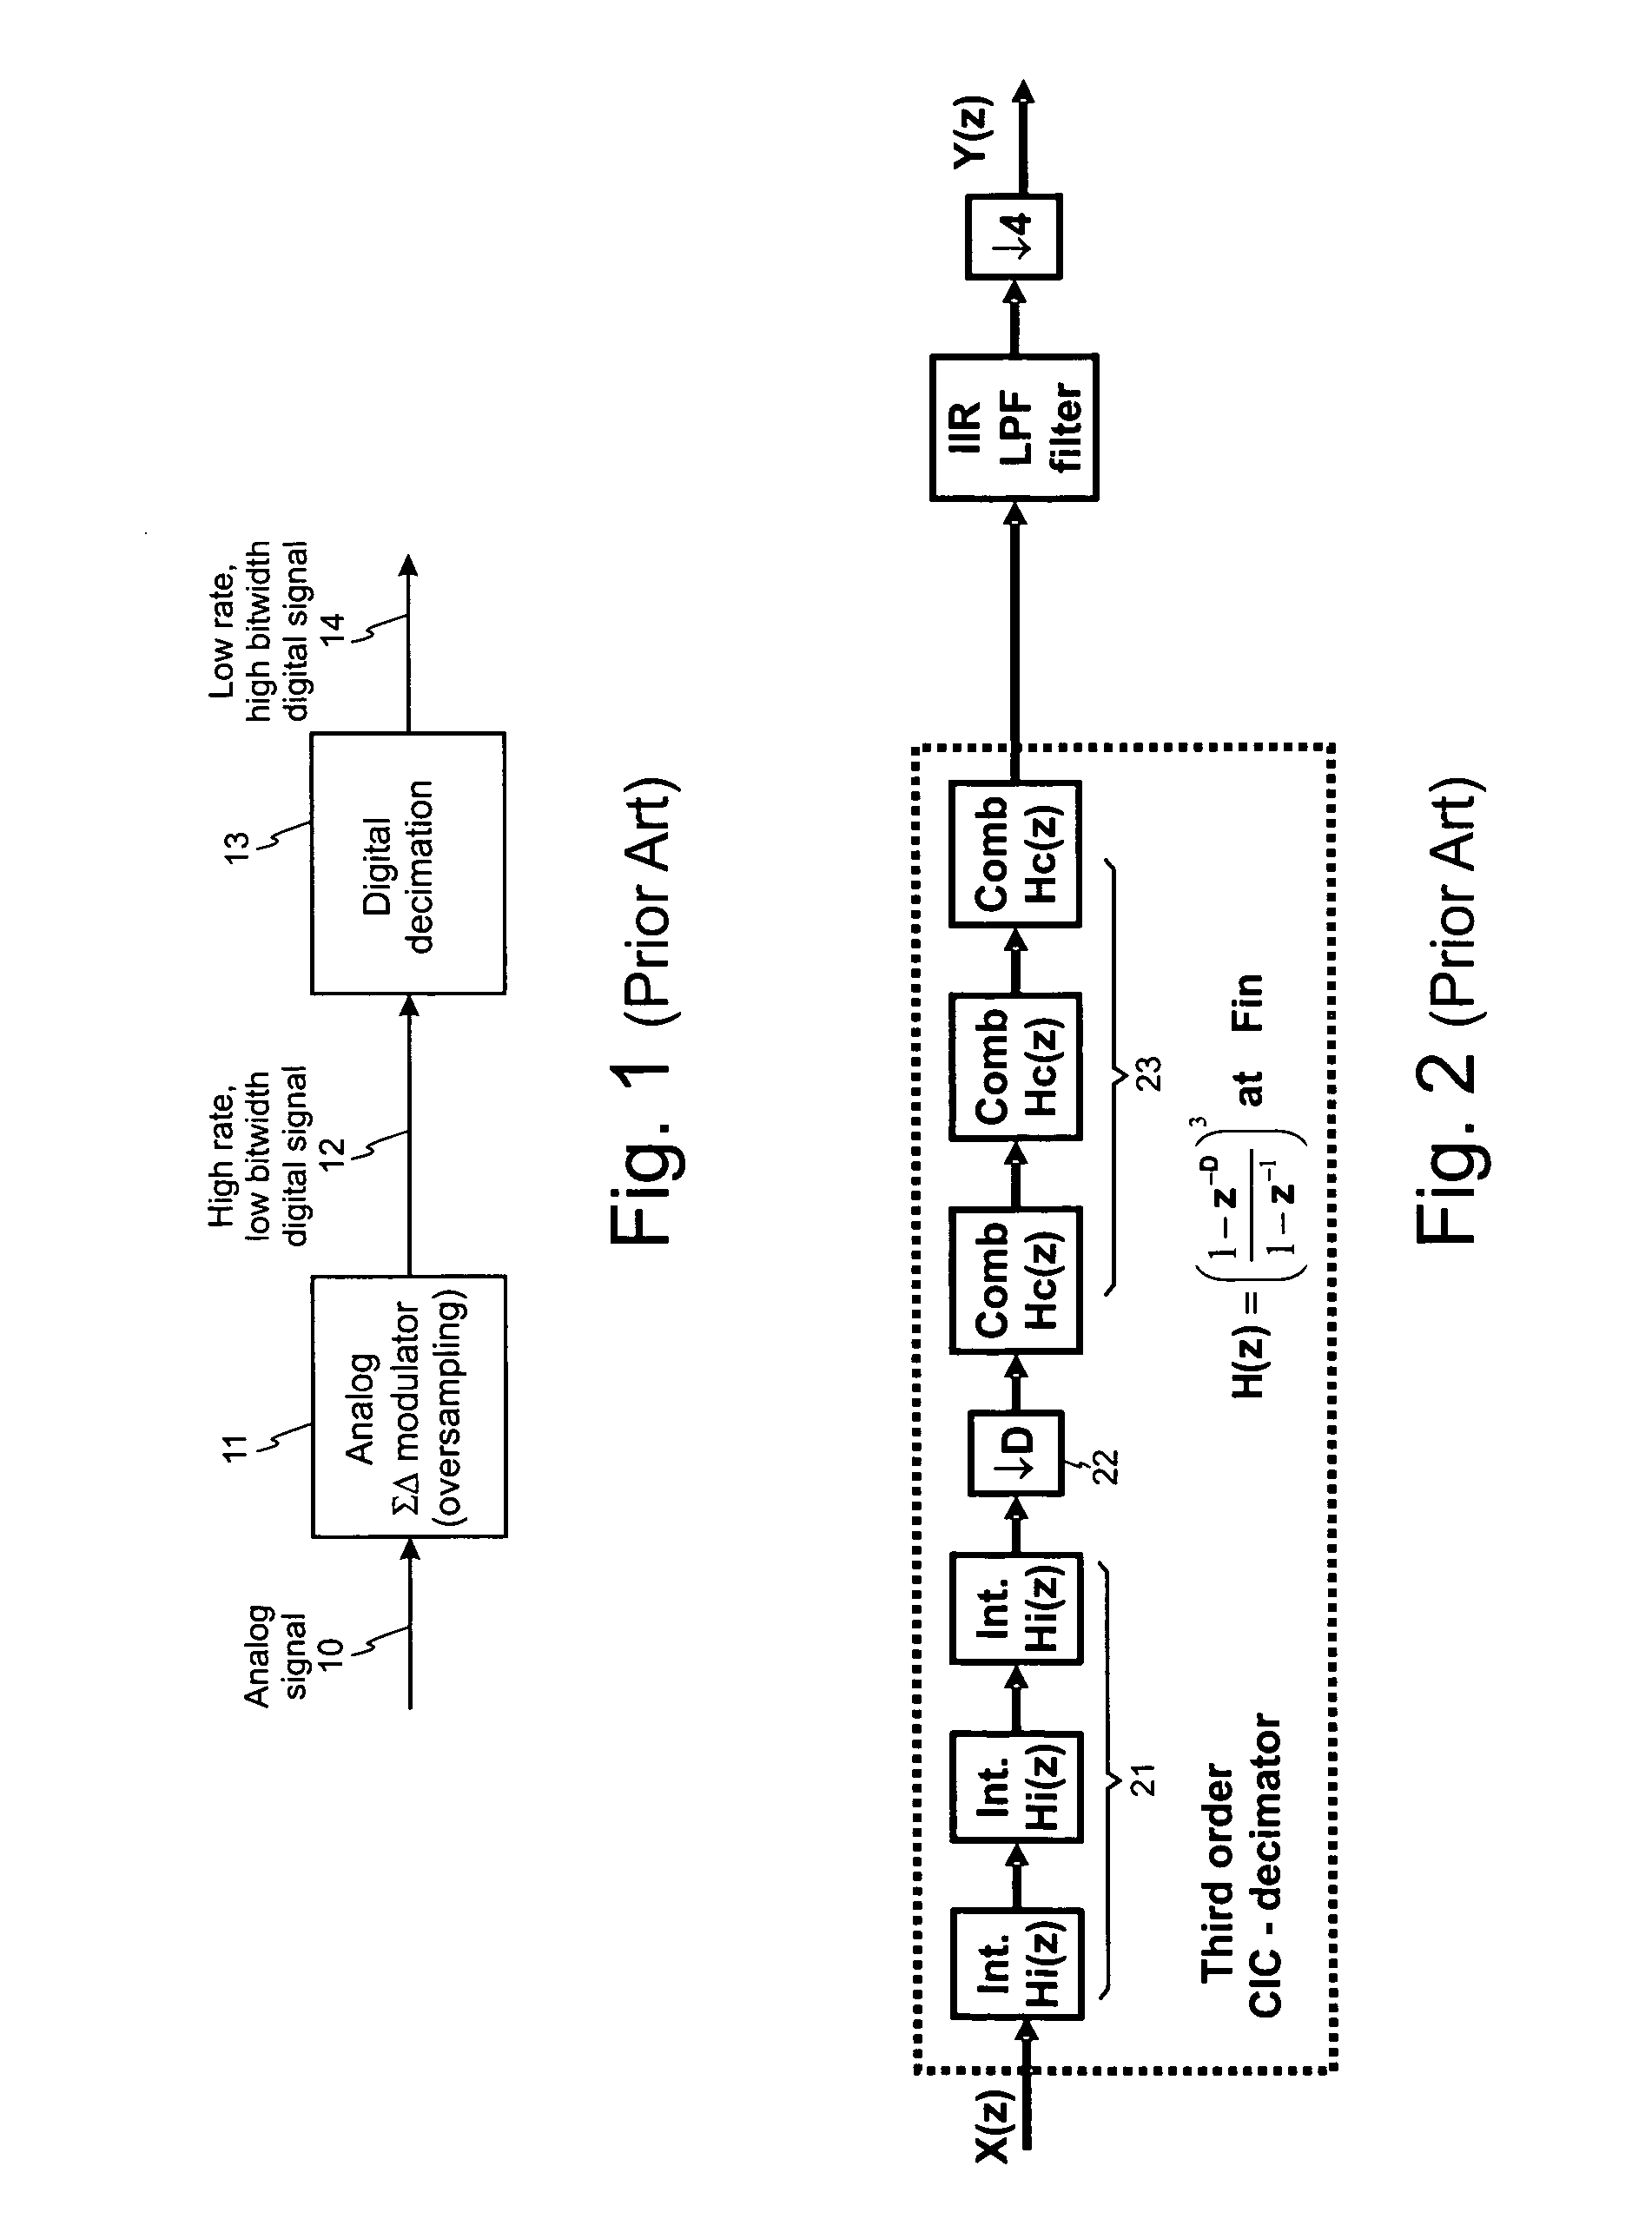 Sample rate converter for reducing the sampling frequency of a signal by a fractional number